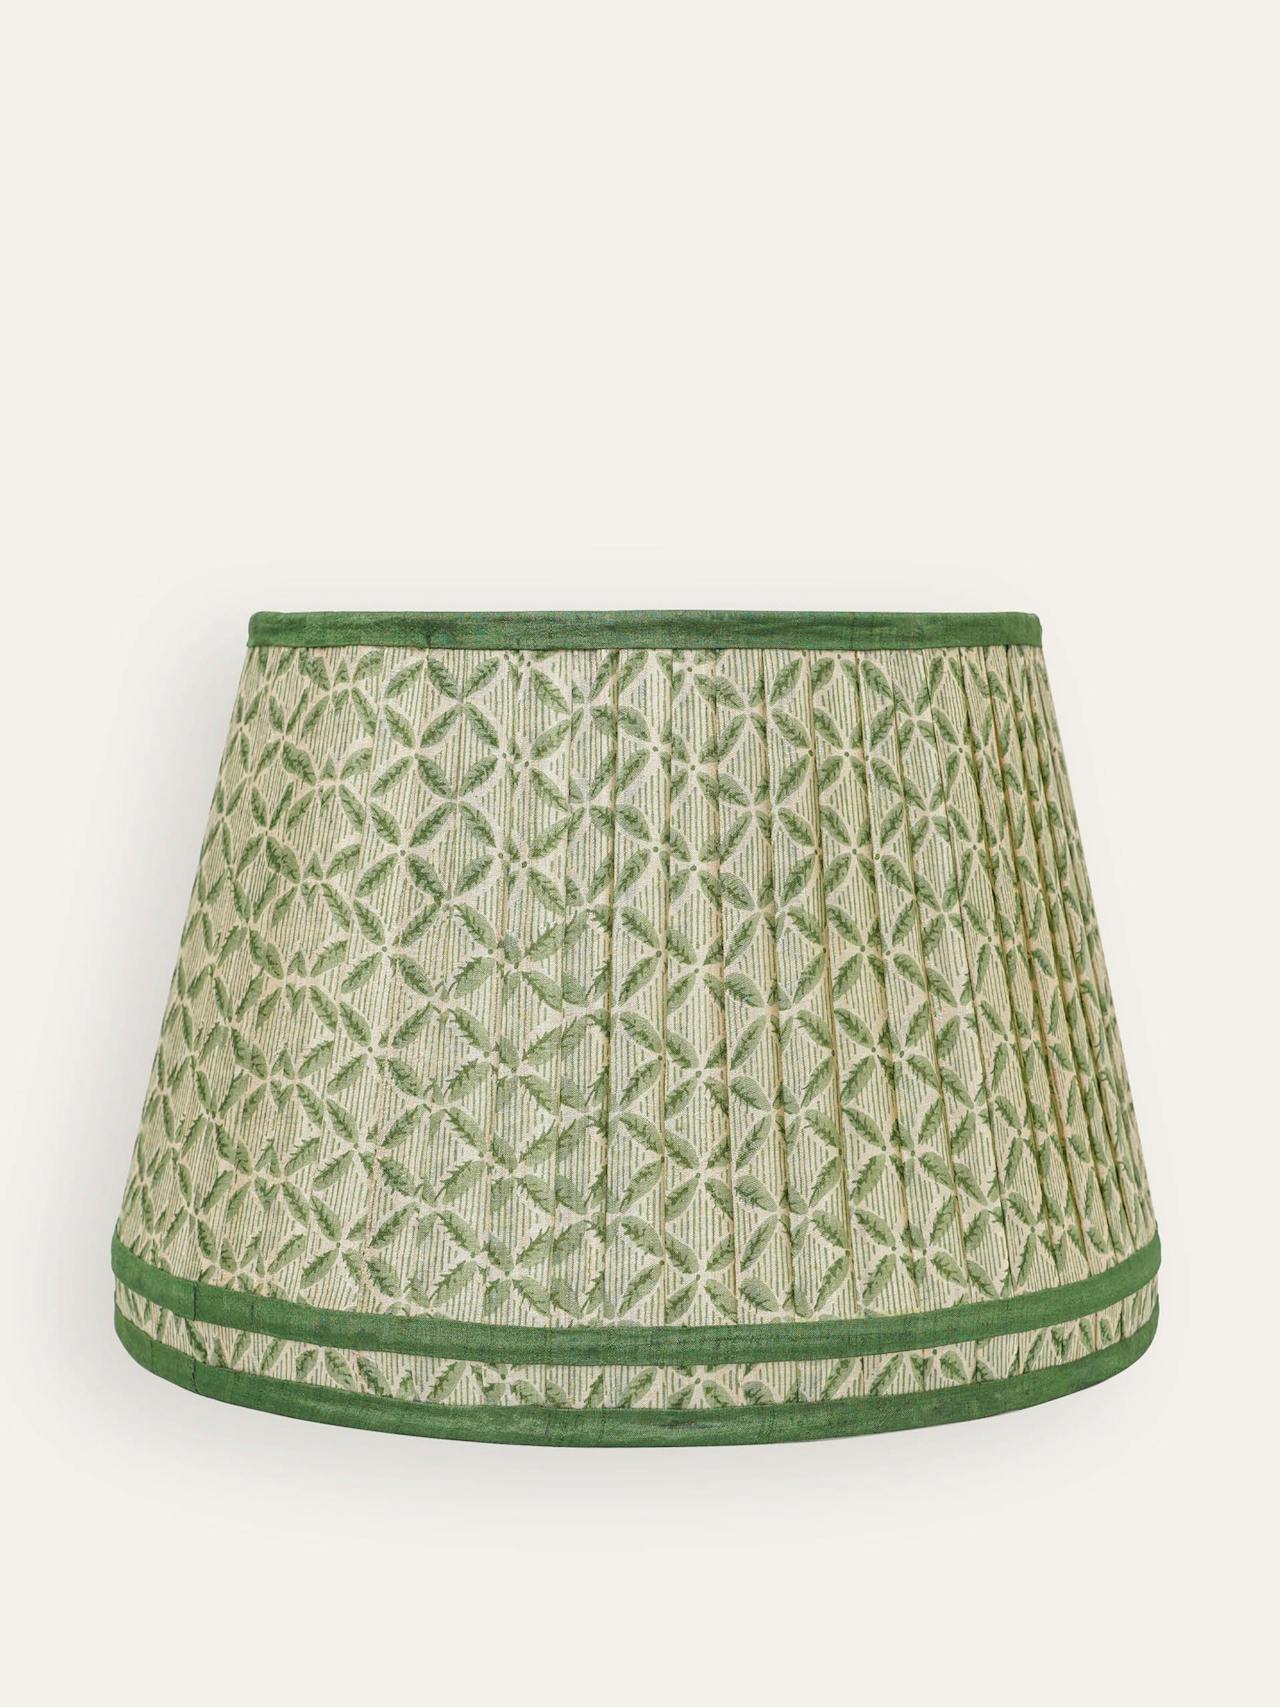 Green Trellis pleated silk double band lampshade